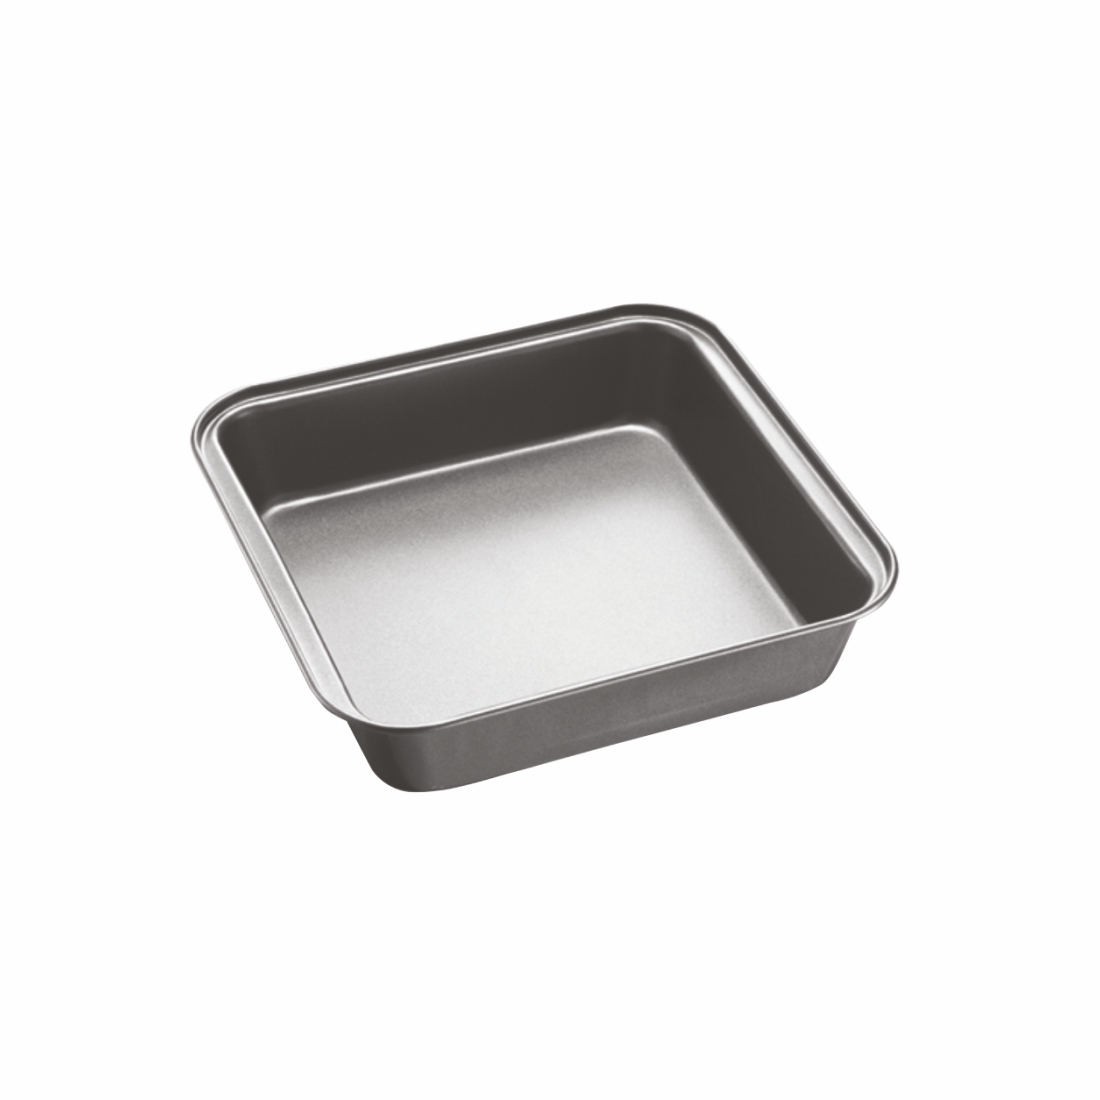 Square Cake Tins - 6, 8, 10 x 4 inch - Set of 3 | Sugar and Crumbs